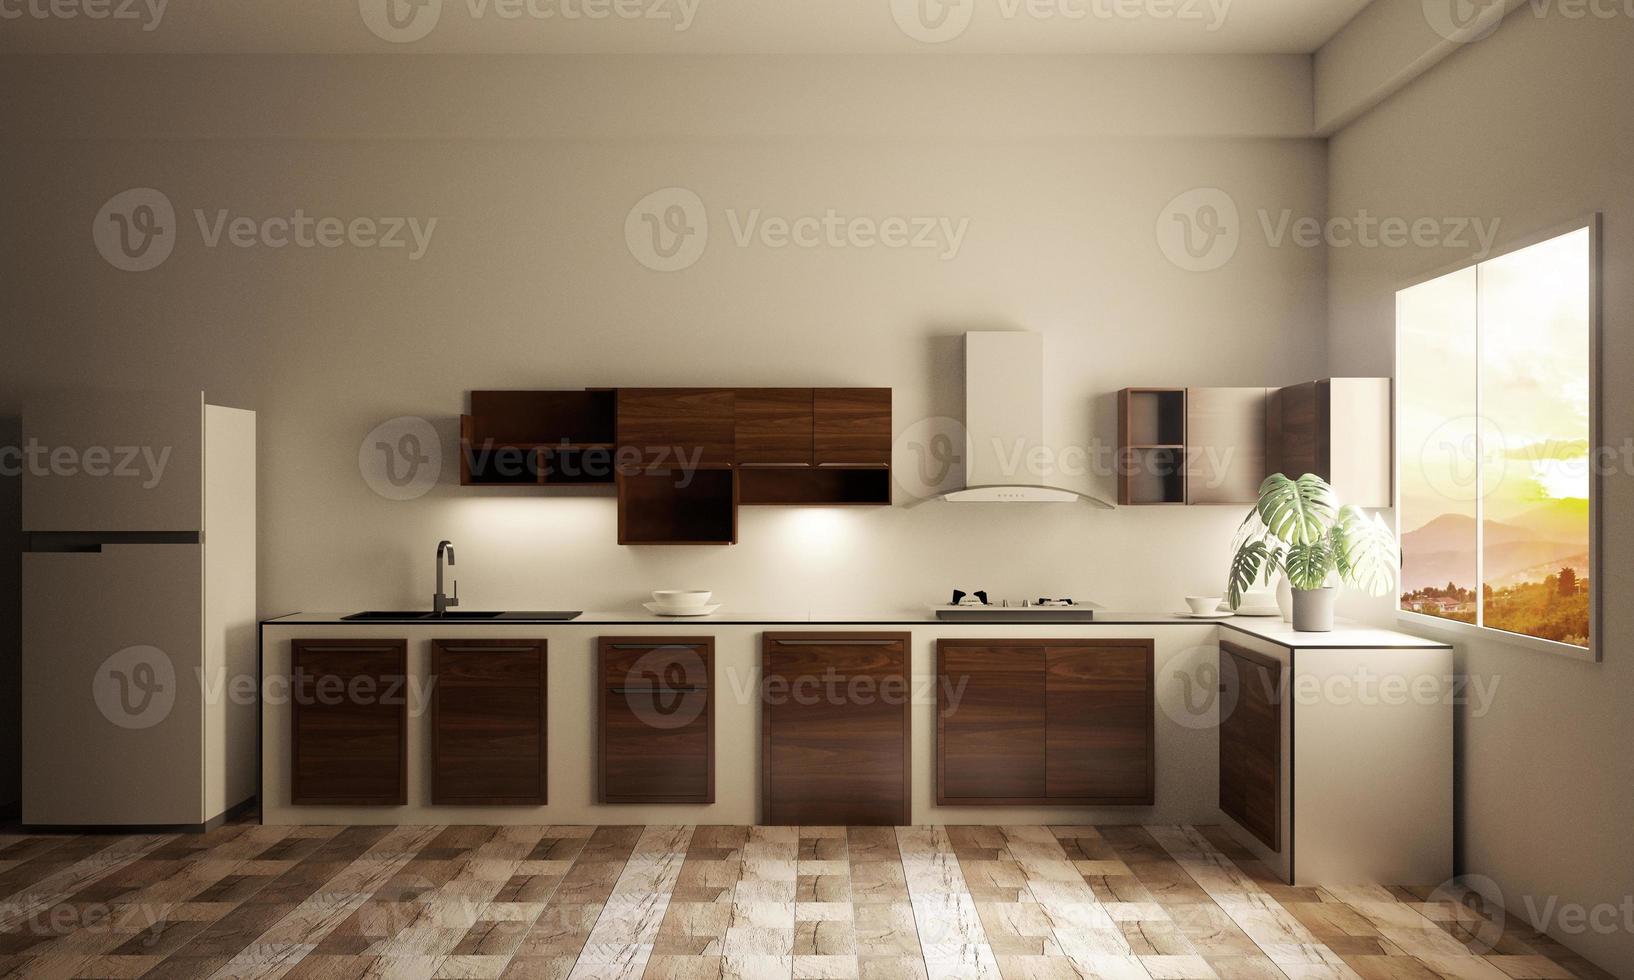 kitchen room interior with Kitchen counter on wooden tiles. 3D rendering photo